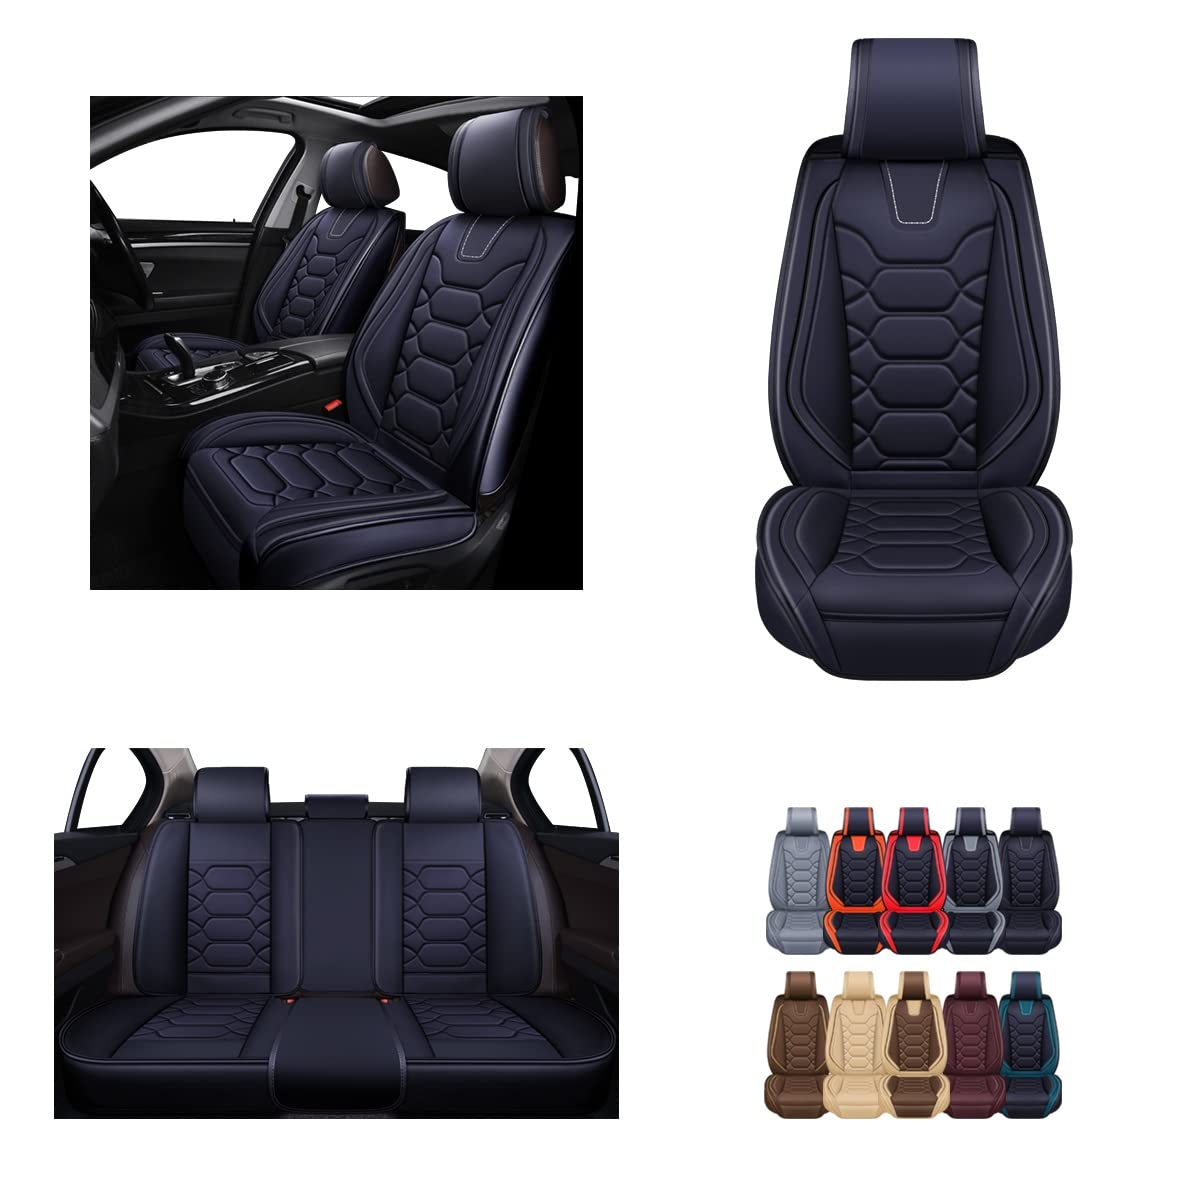 OASIS AUTO car Seat covers Accessories Full Set Premium Nappa Leather cushion Protector Universal Fit for Most cars SUV Pick-up 